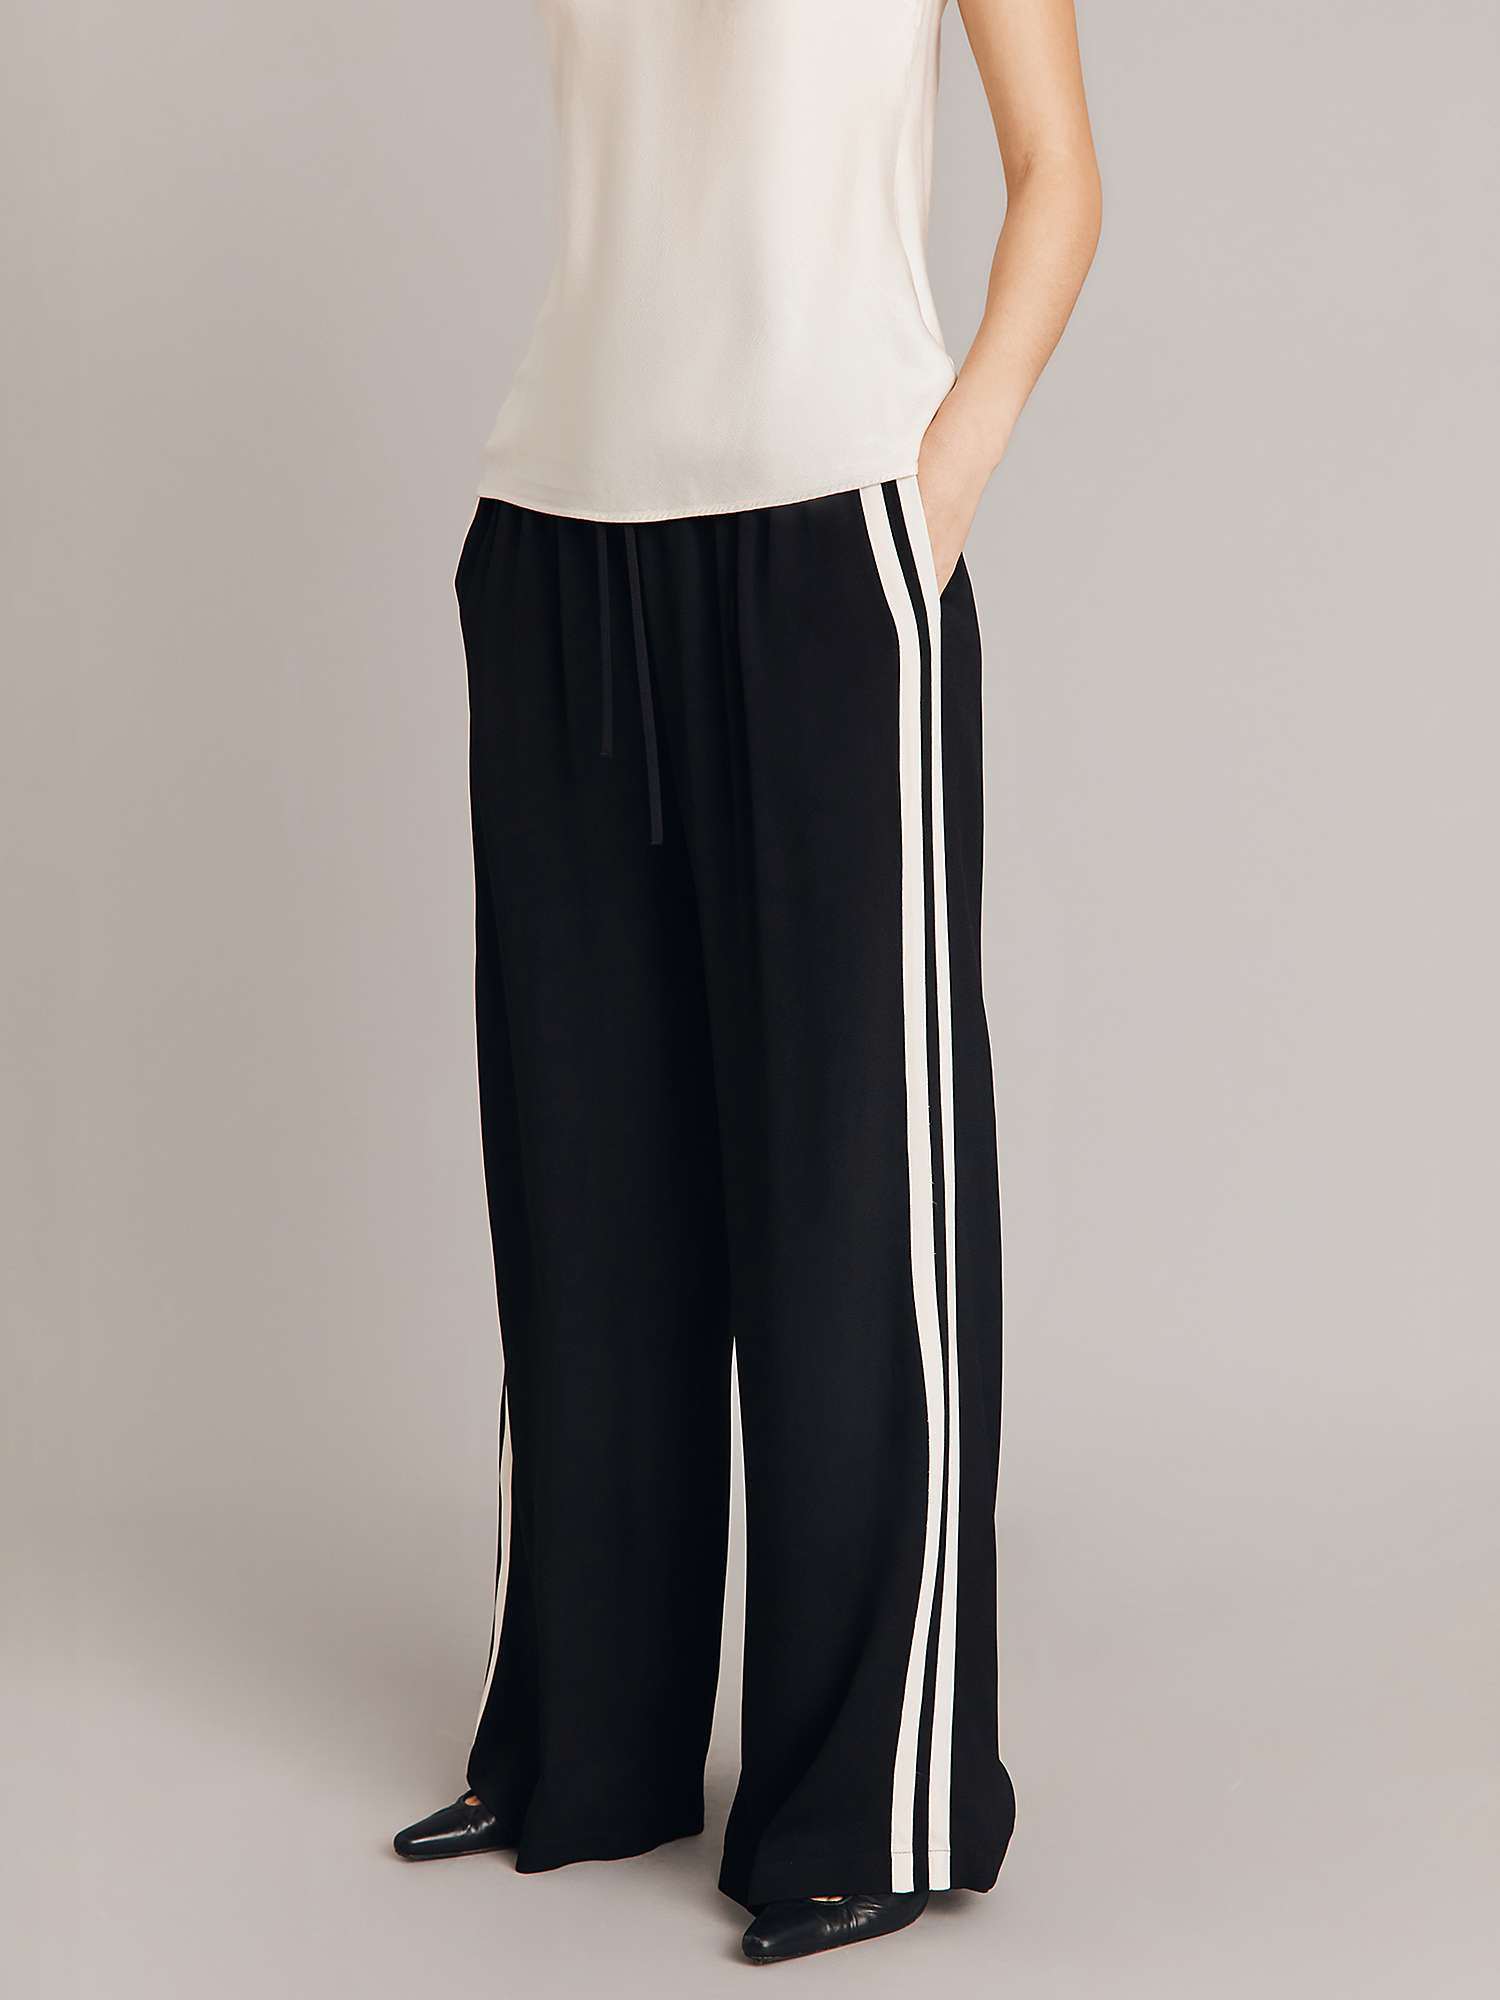 Buy Ghost Mila Side Stripe Palazzo Trousers, Black/Ivory Online at johnlewis.com